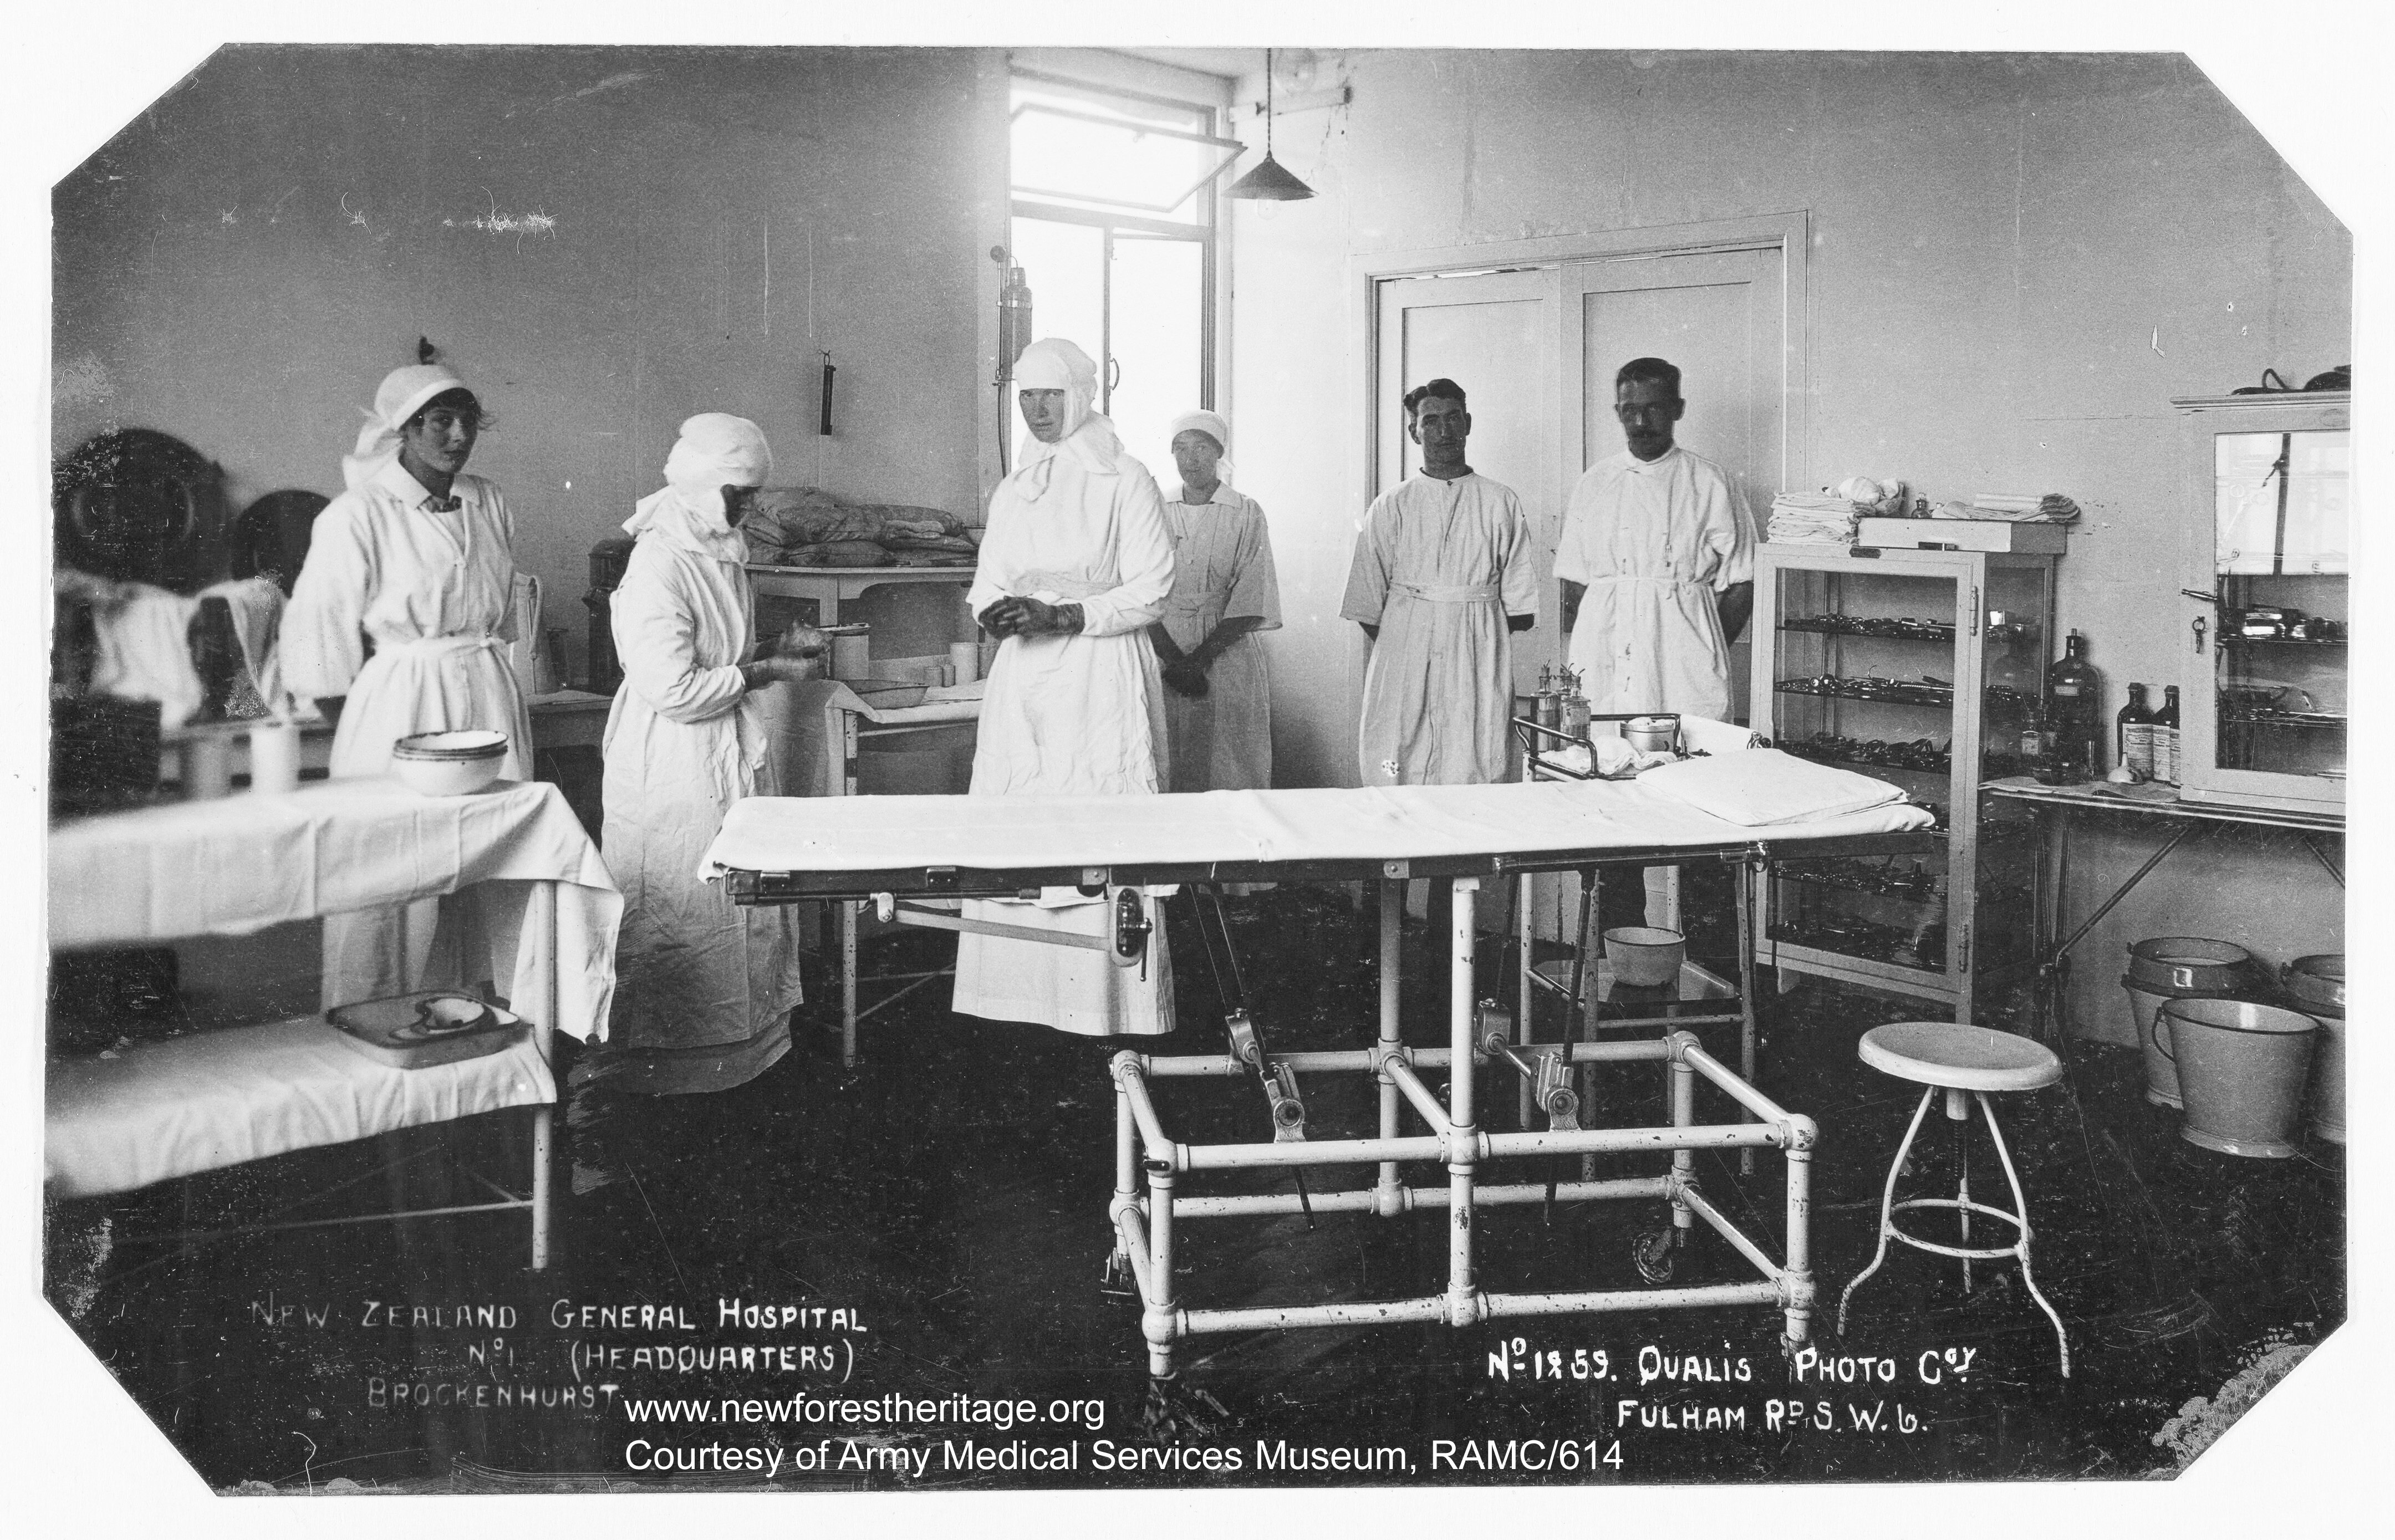 Medical staff in Operating theatre, No.1 New Zealand General Hospital. 1918